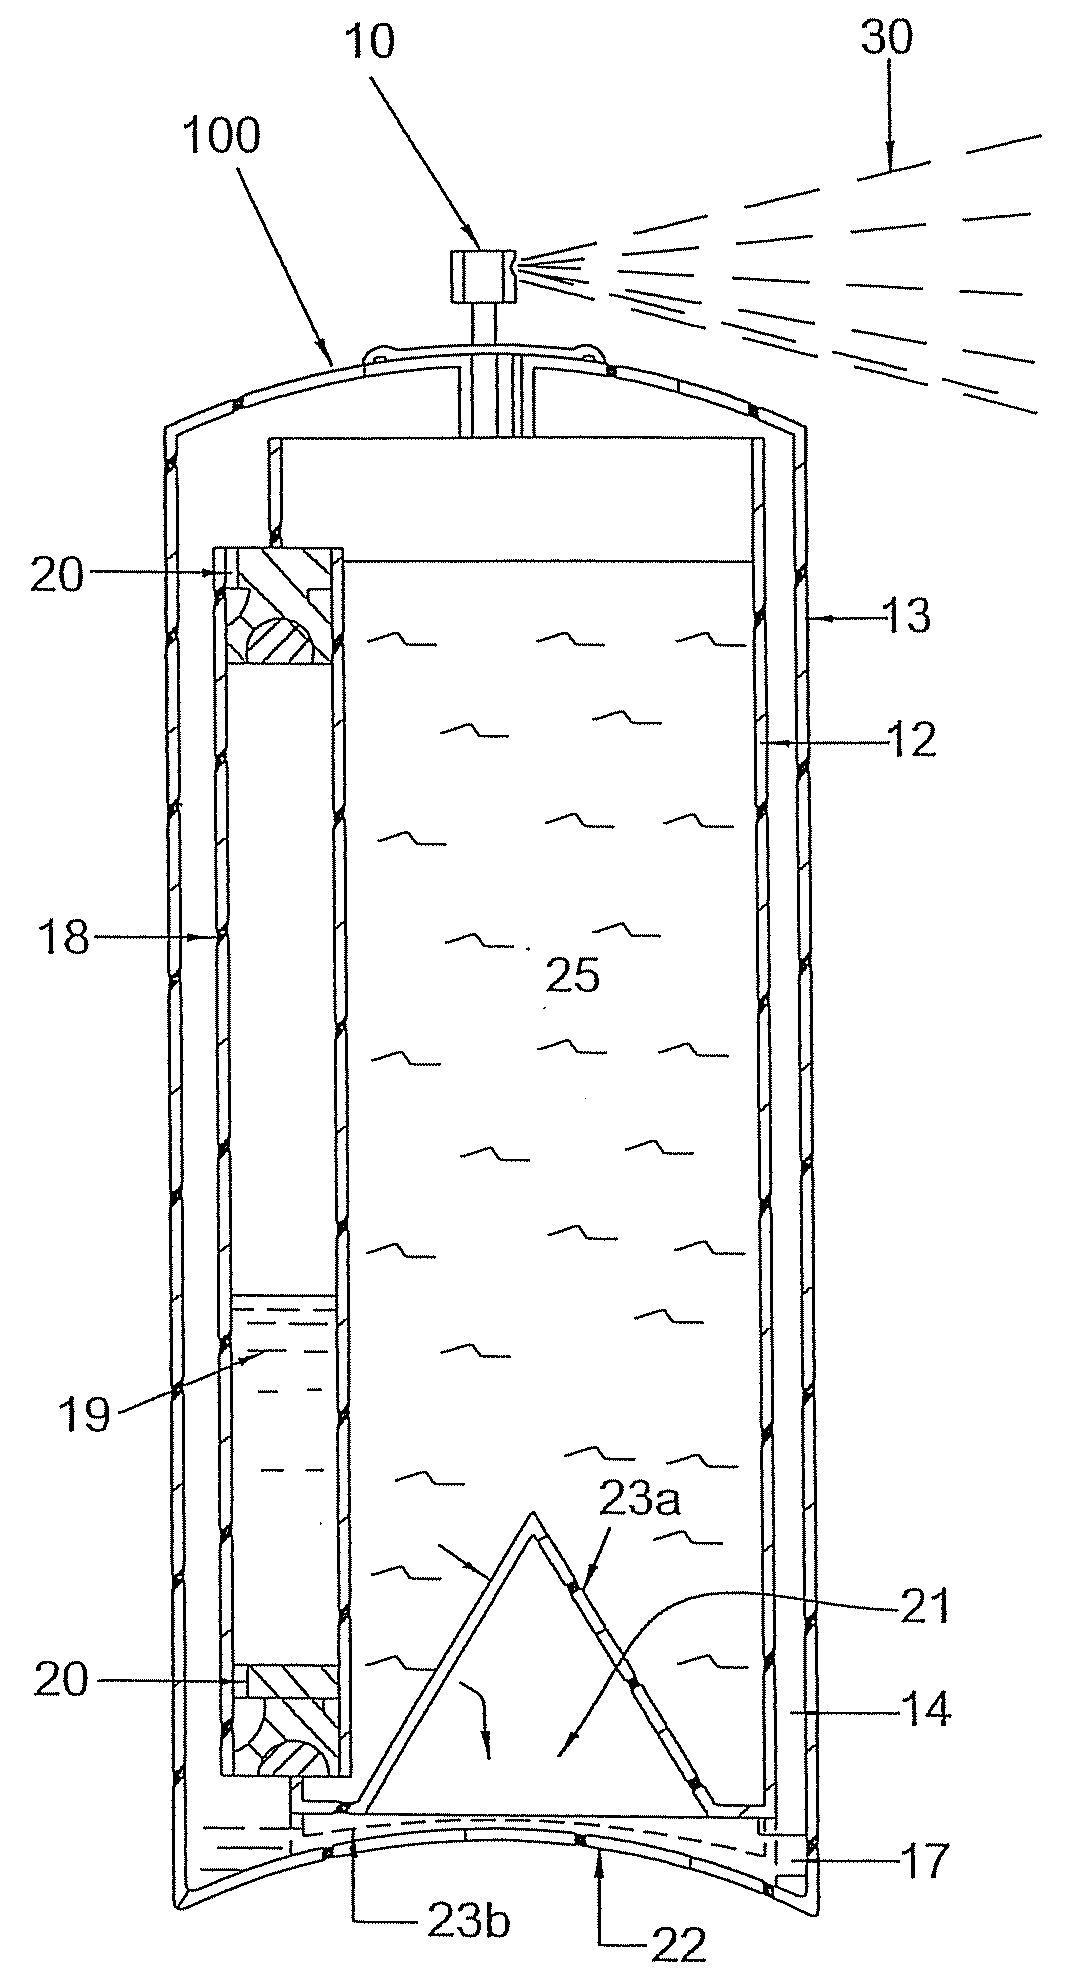 Continuous spray scalp therapy and dispensing systems for same